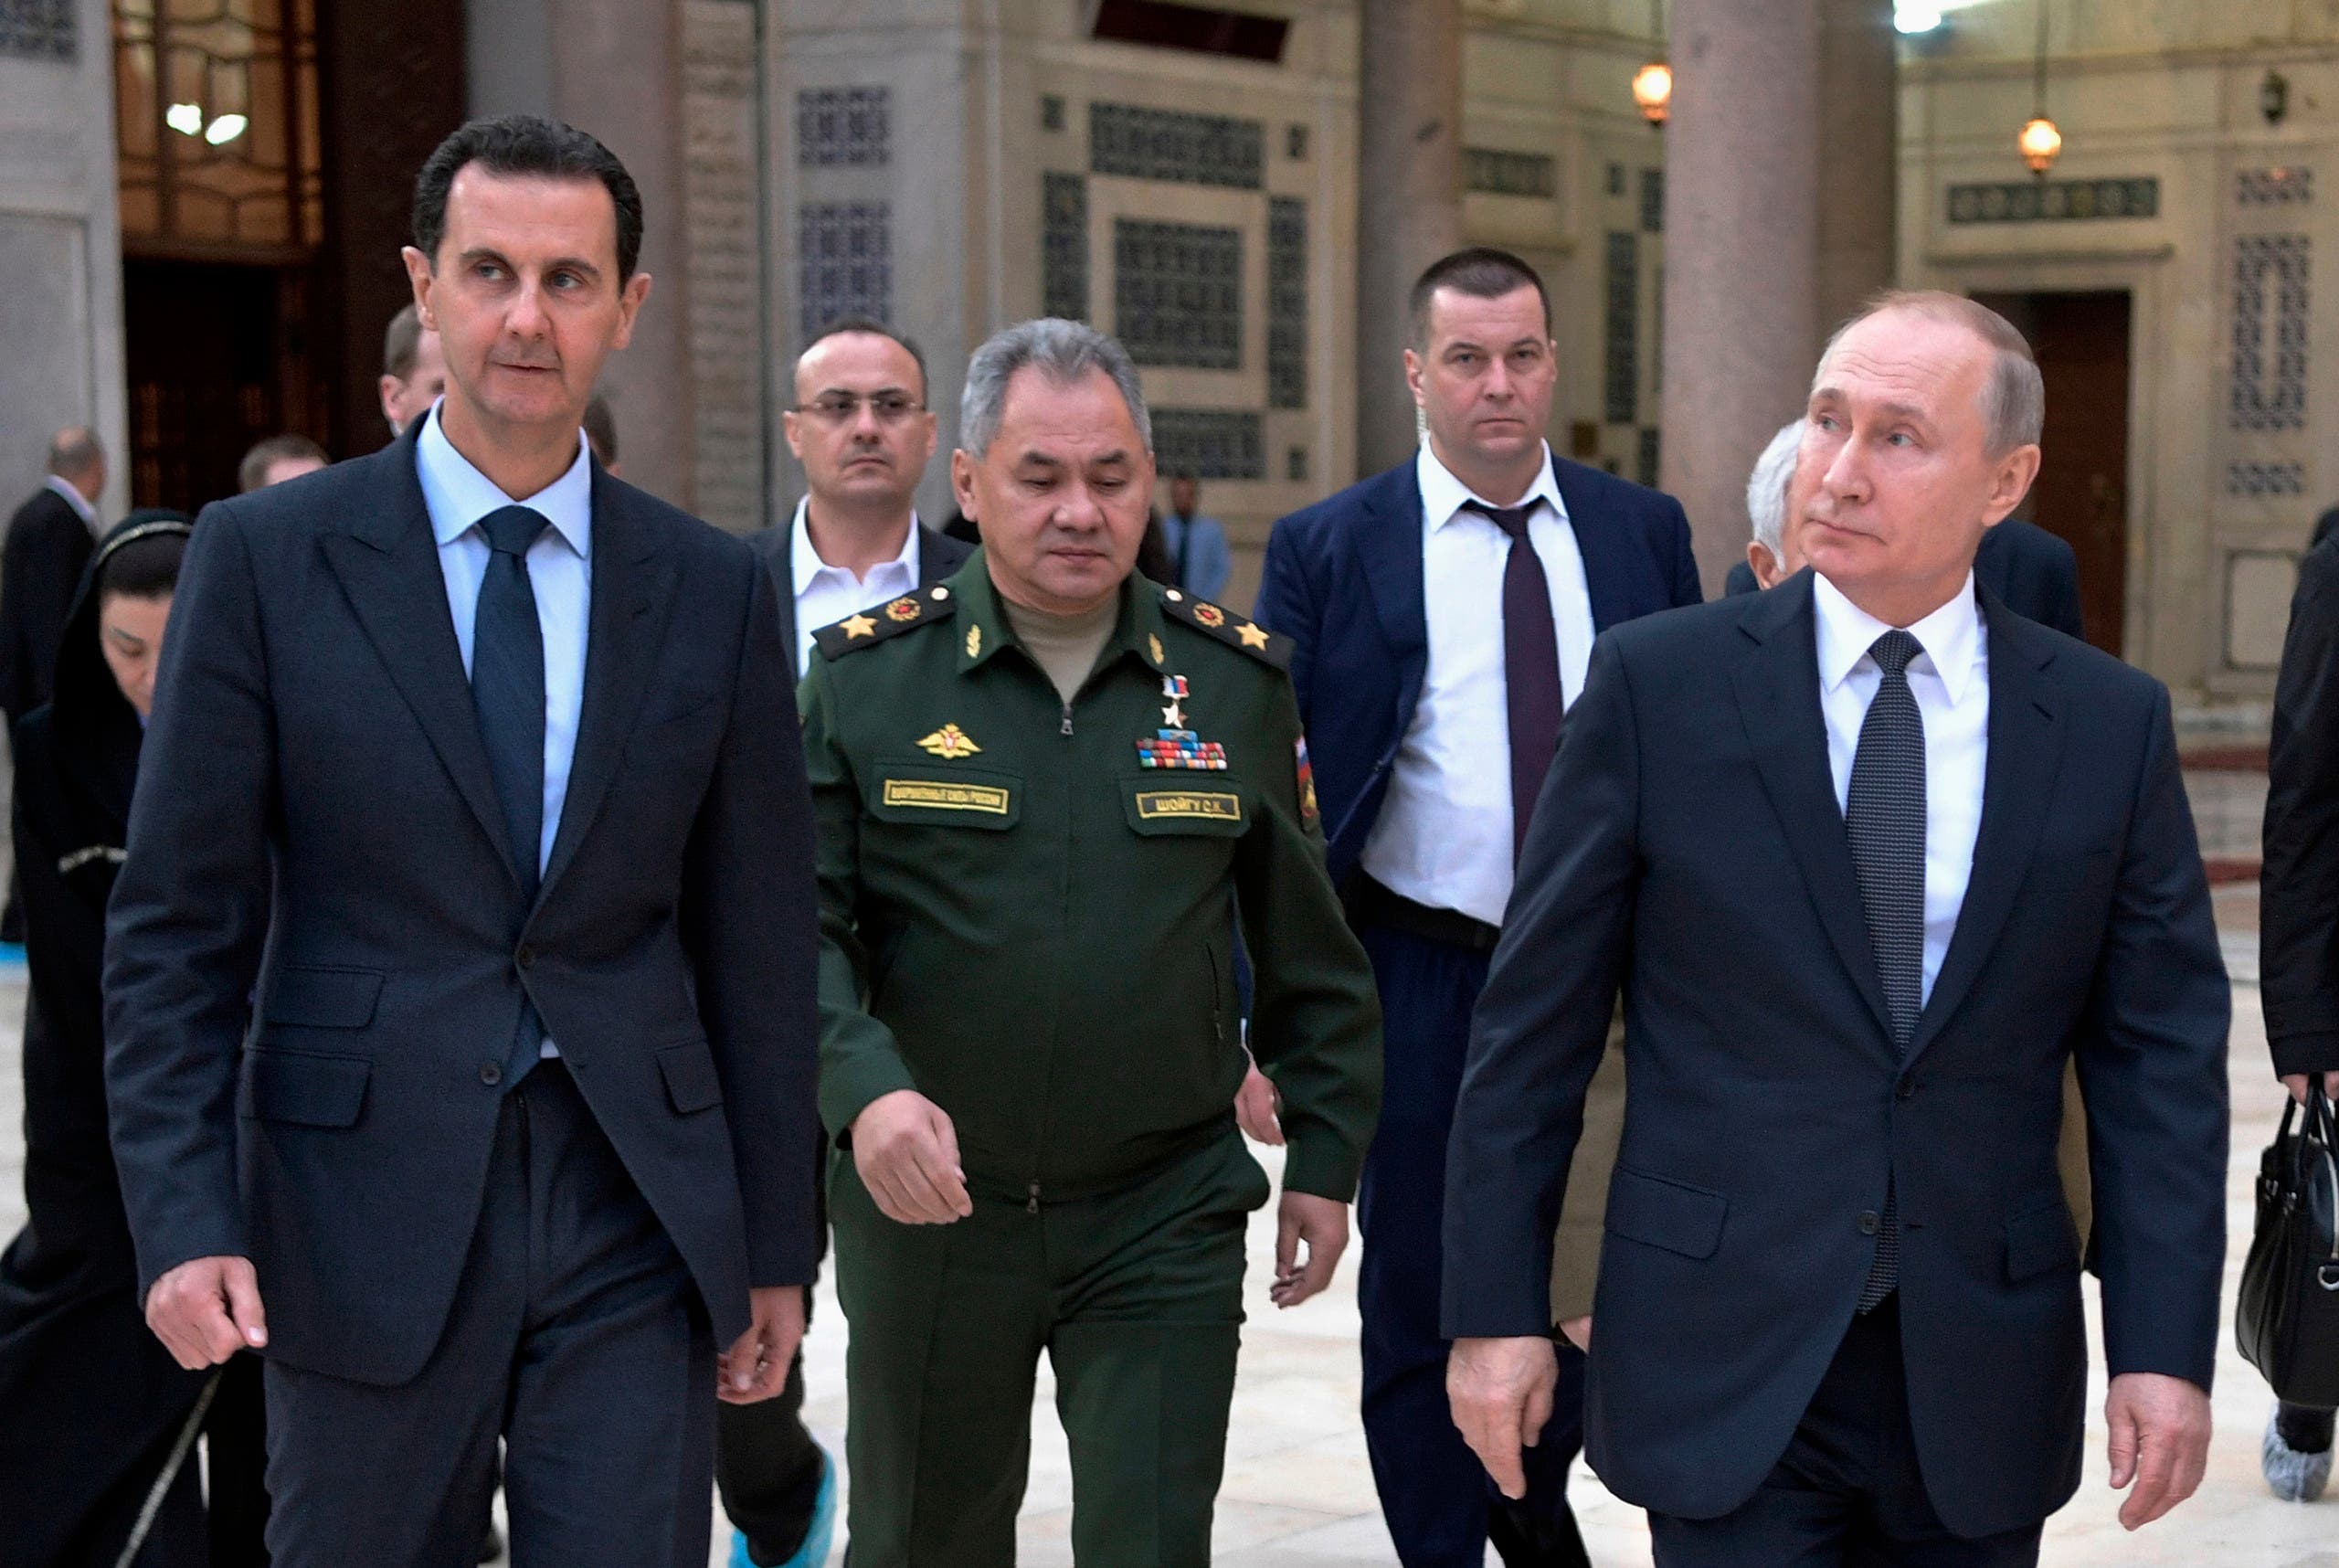 Russian President Vladimir Putin, right, Syrian President Bashar Assad, left, and Russian Defense Minister Sergei Shoigu, center, visit the Umayyad Mosque in Damascus, Syria, Tuesday, January 7, 2020.  (File photo: AP)